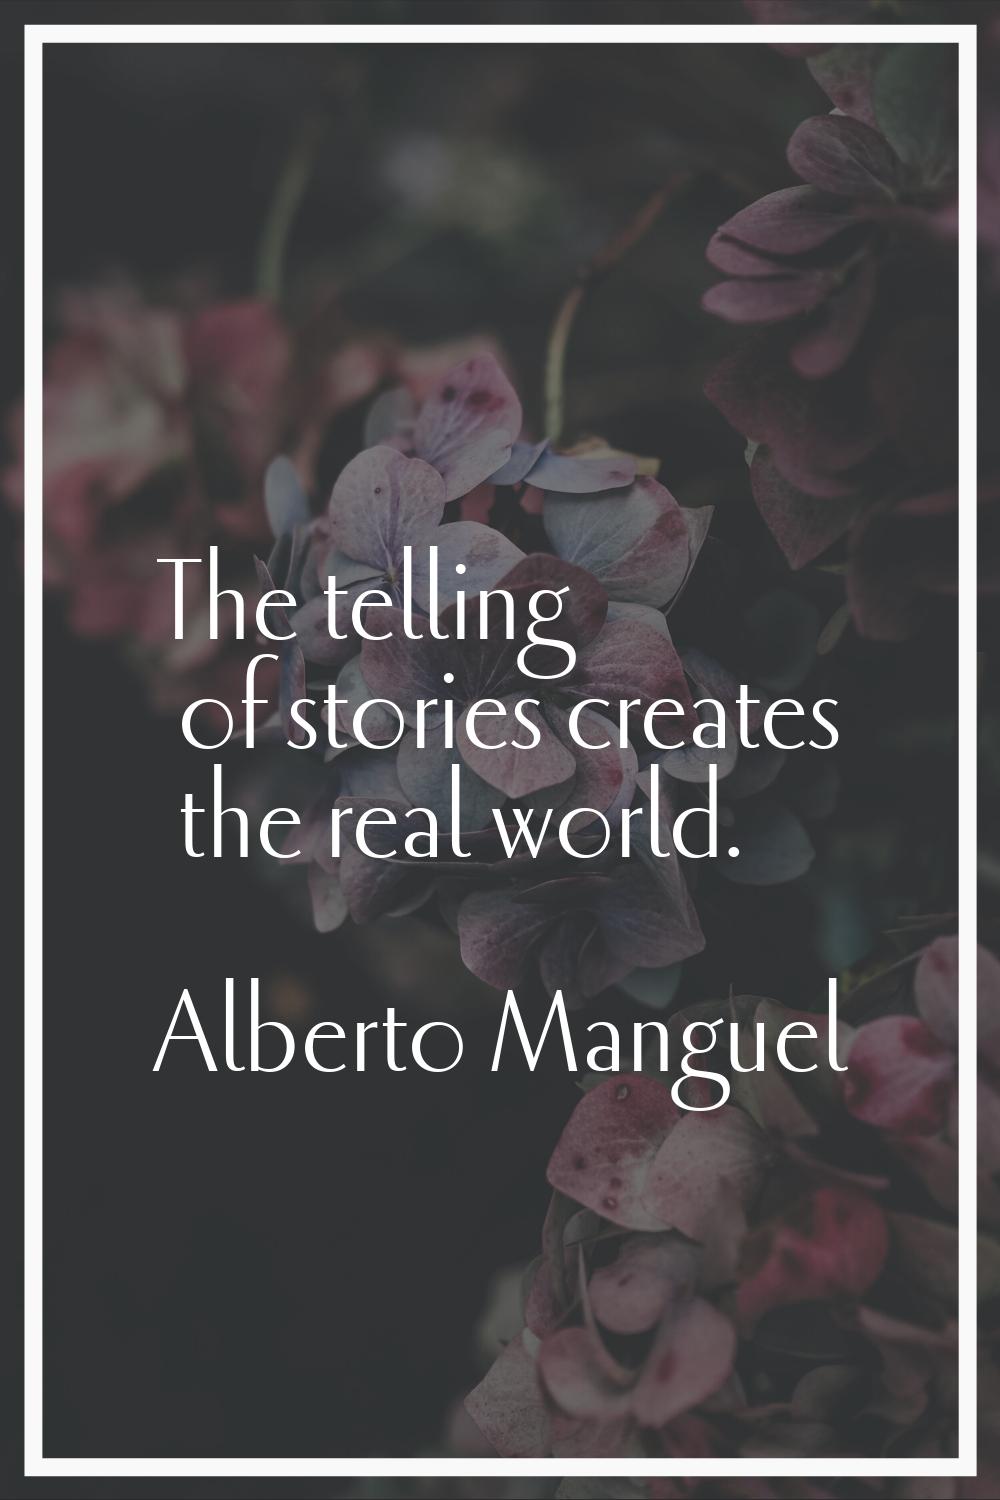 The telling of stories creates the real world.